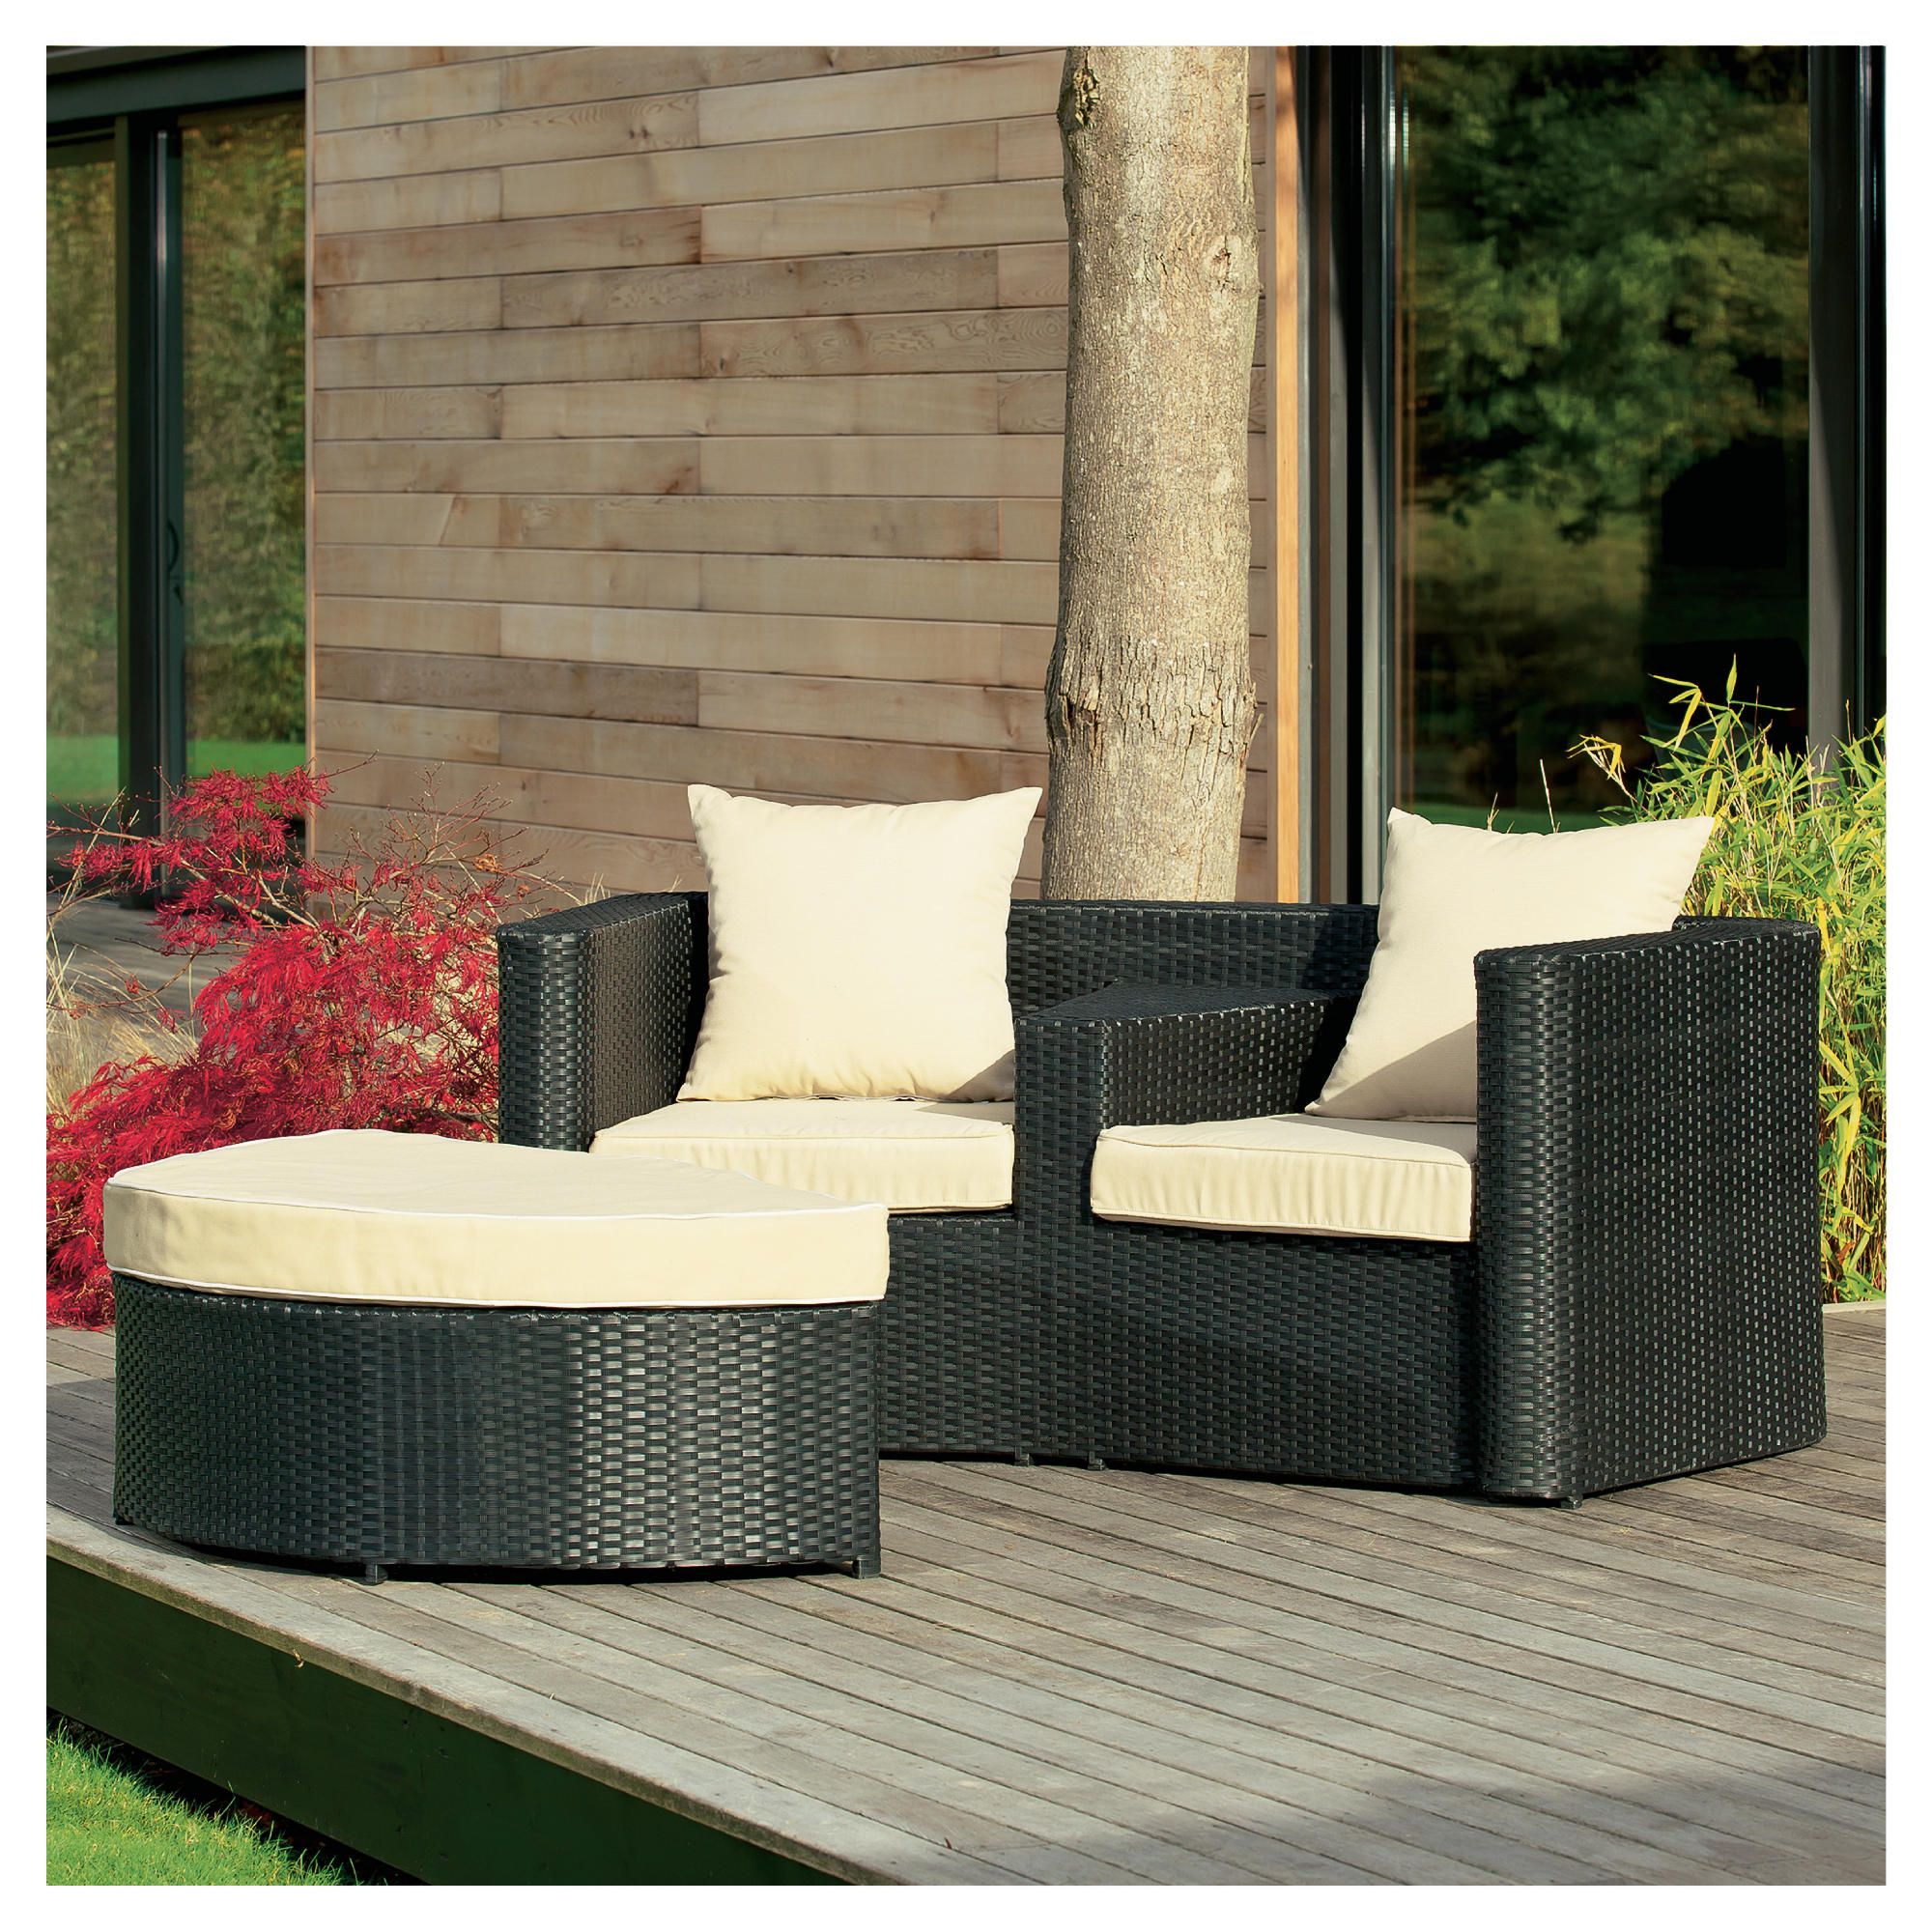 Figi Duo set with footstool, charcoal at Tesco Direct